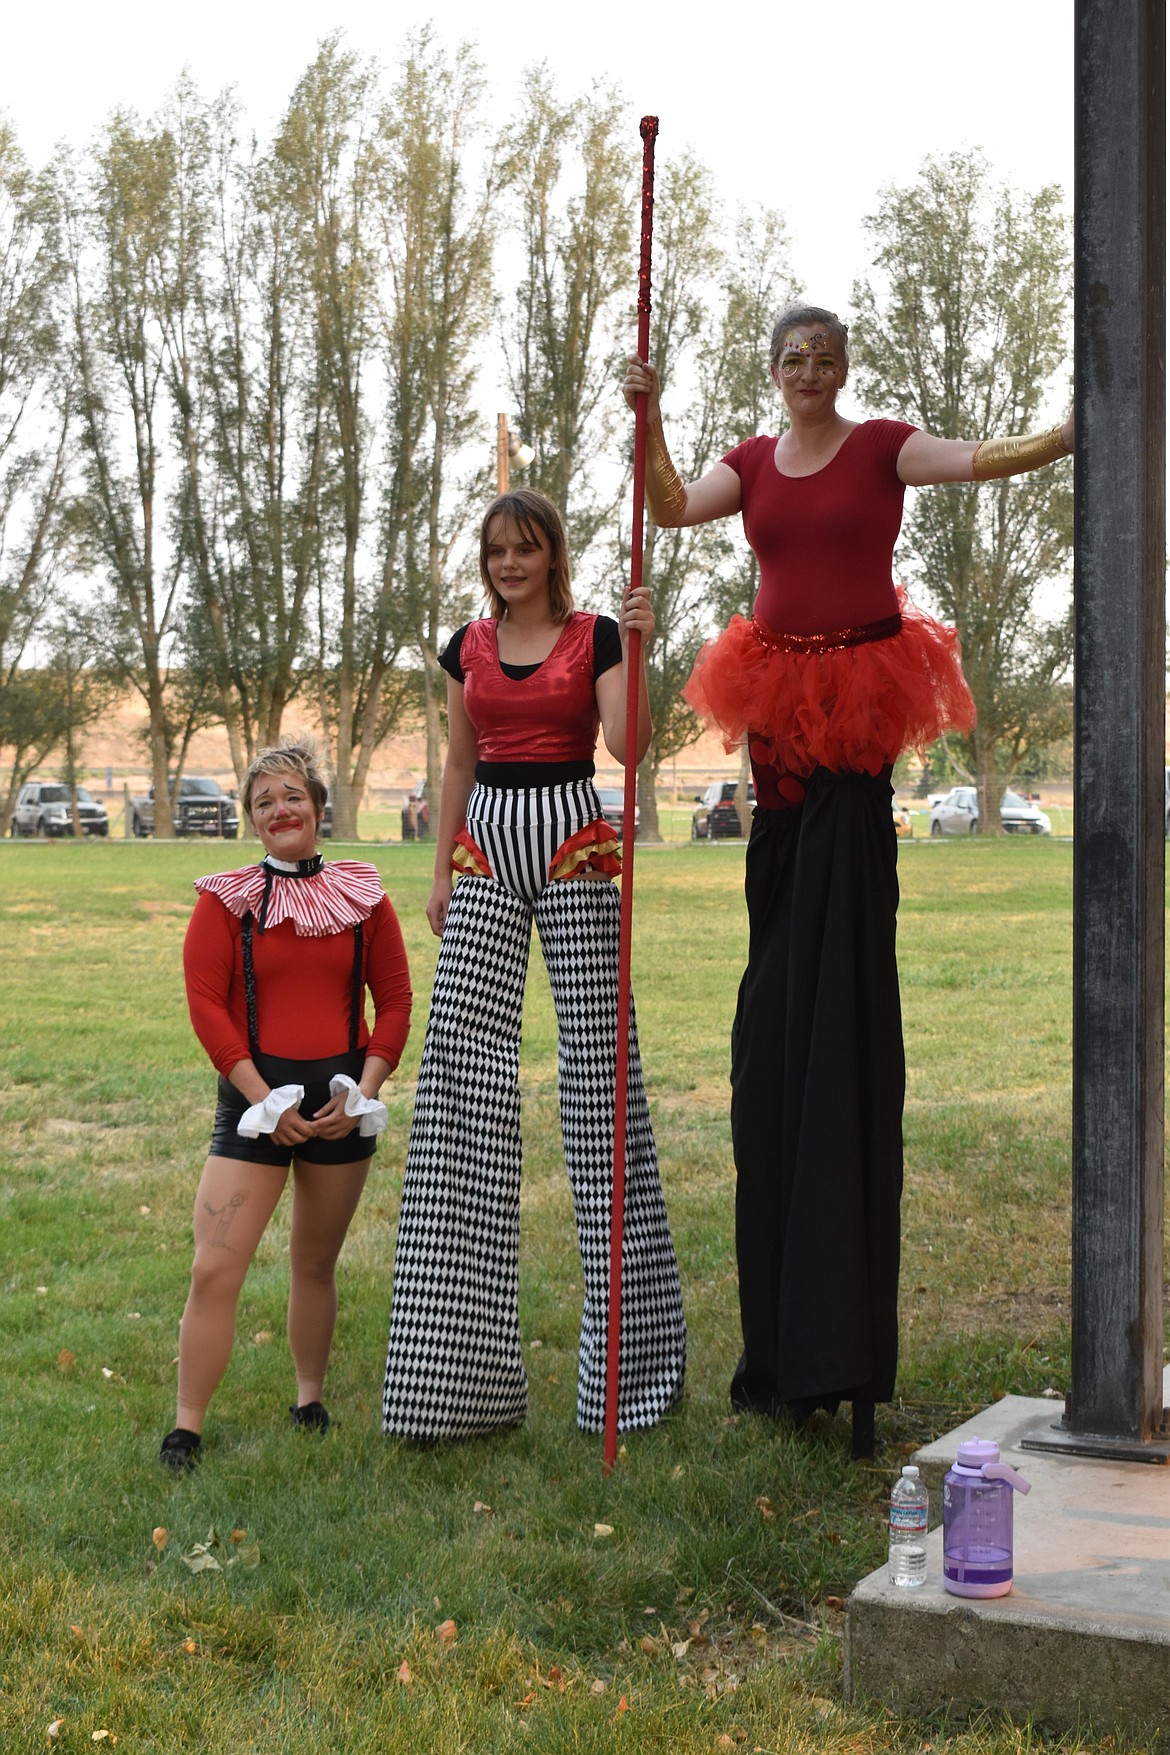 Other performers with the show had stilts of varying heights at Wheat Land Communities’ Fair which was held over the weekend.